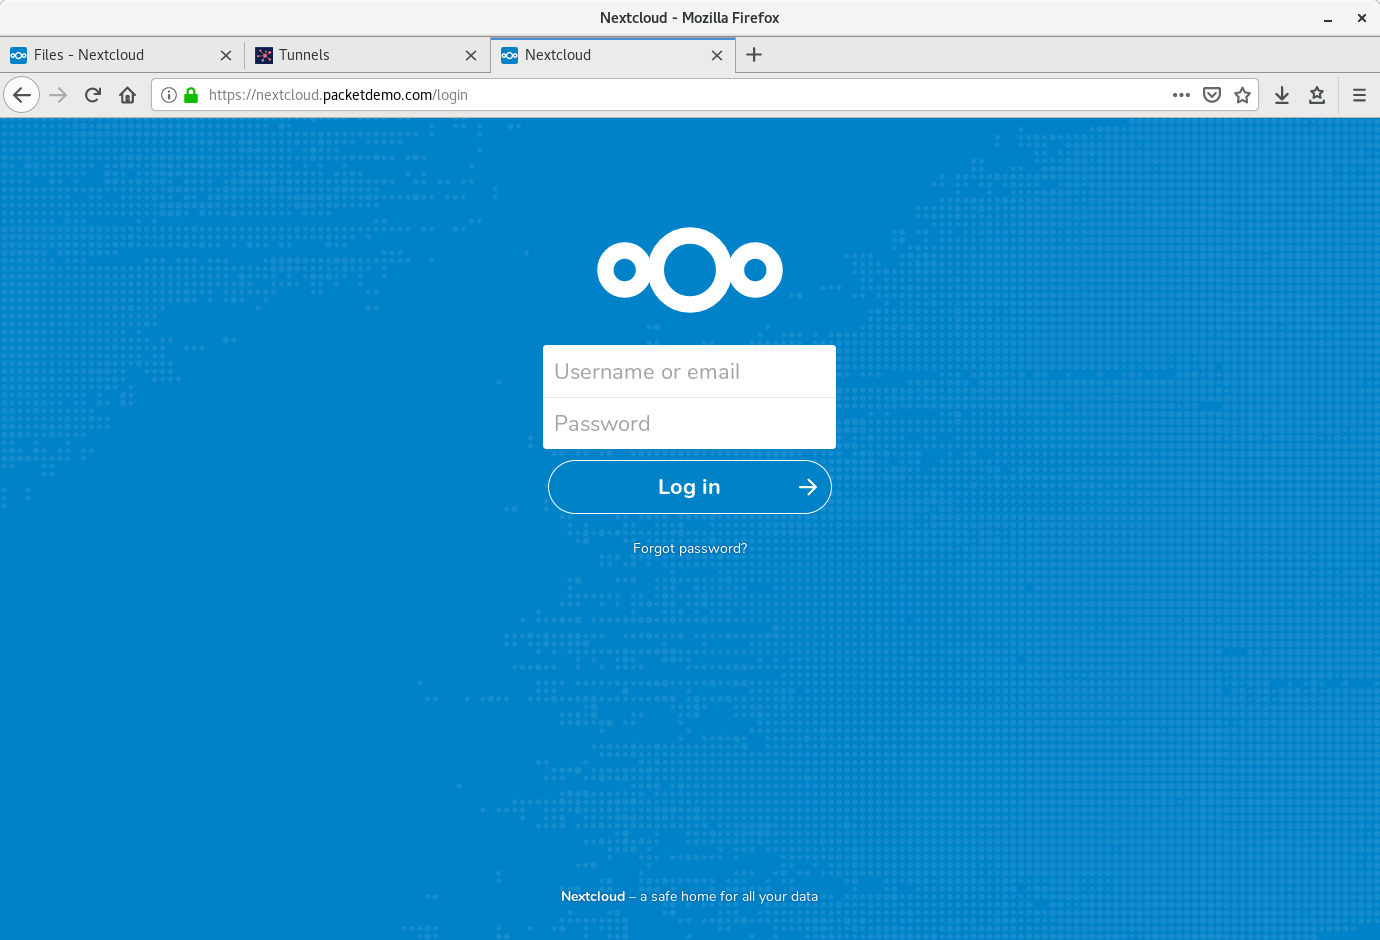 Visiting our Nextcloud with HTTPS.